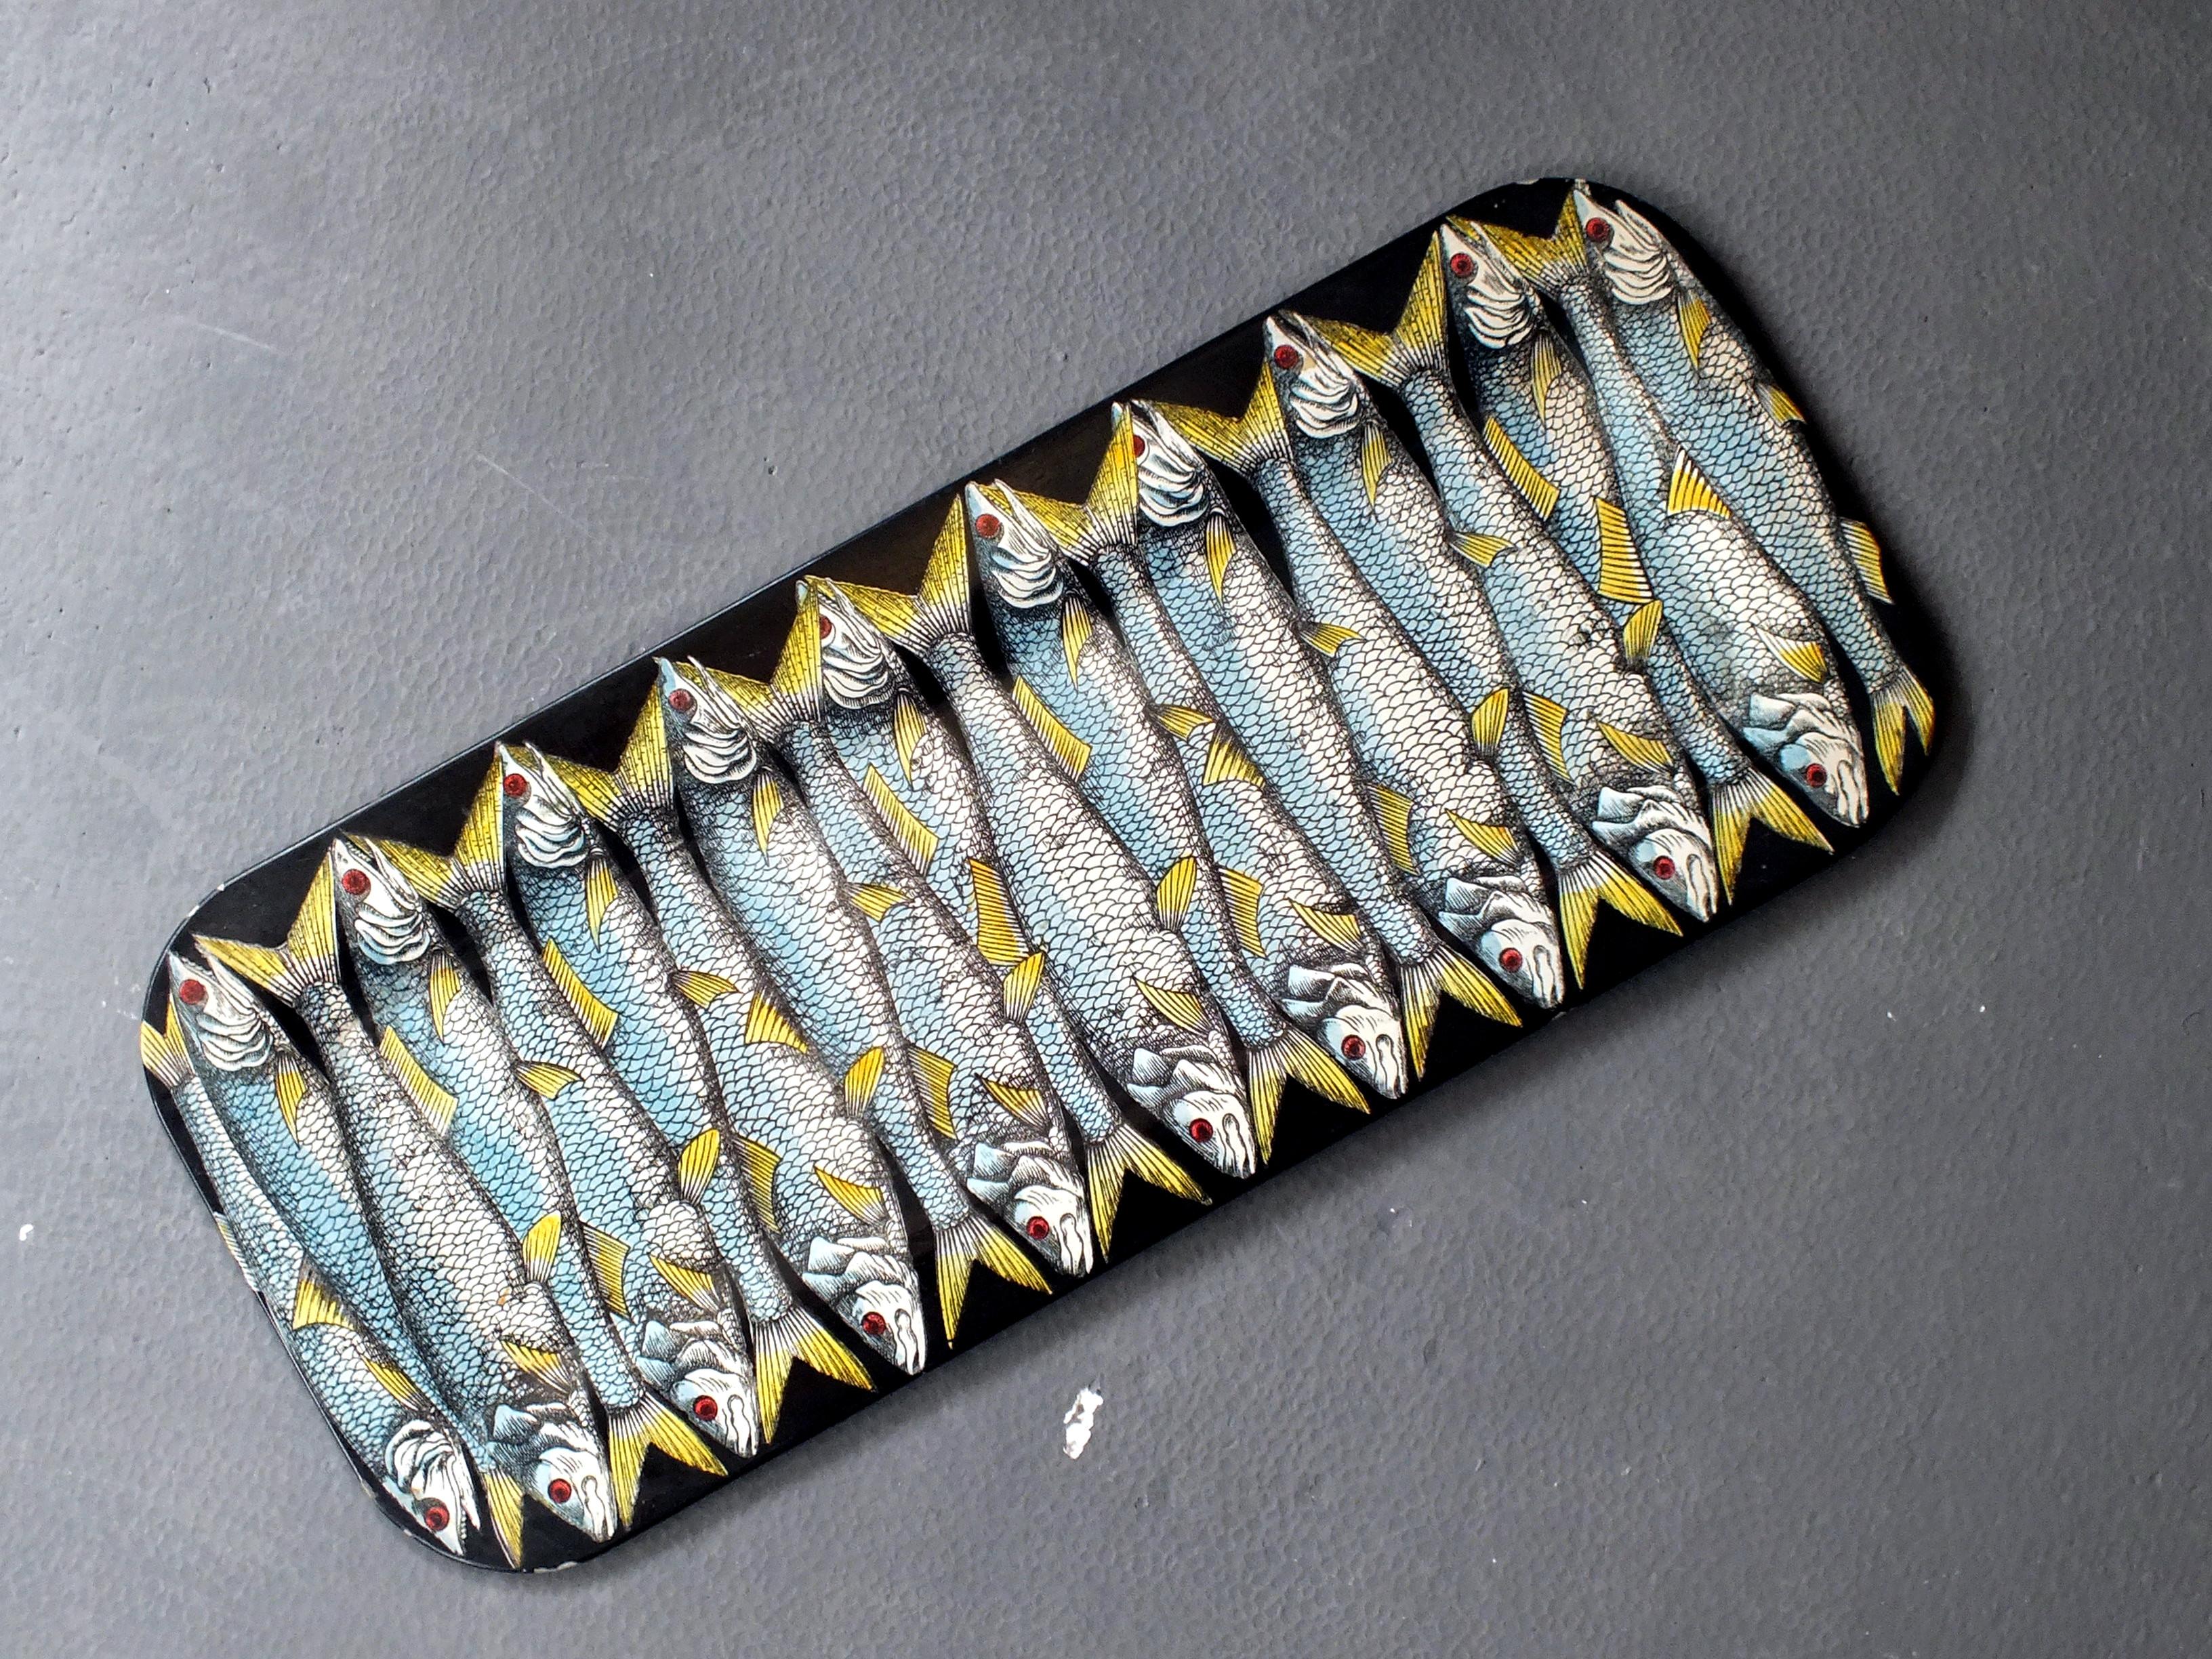 Fornasetti Piero Milan Italy in years '50 a  first original edit of lacquered tray  in metal, with printed decoration of fish. Labeled